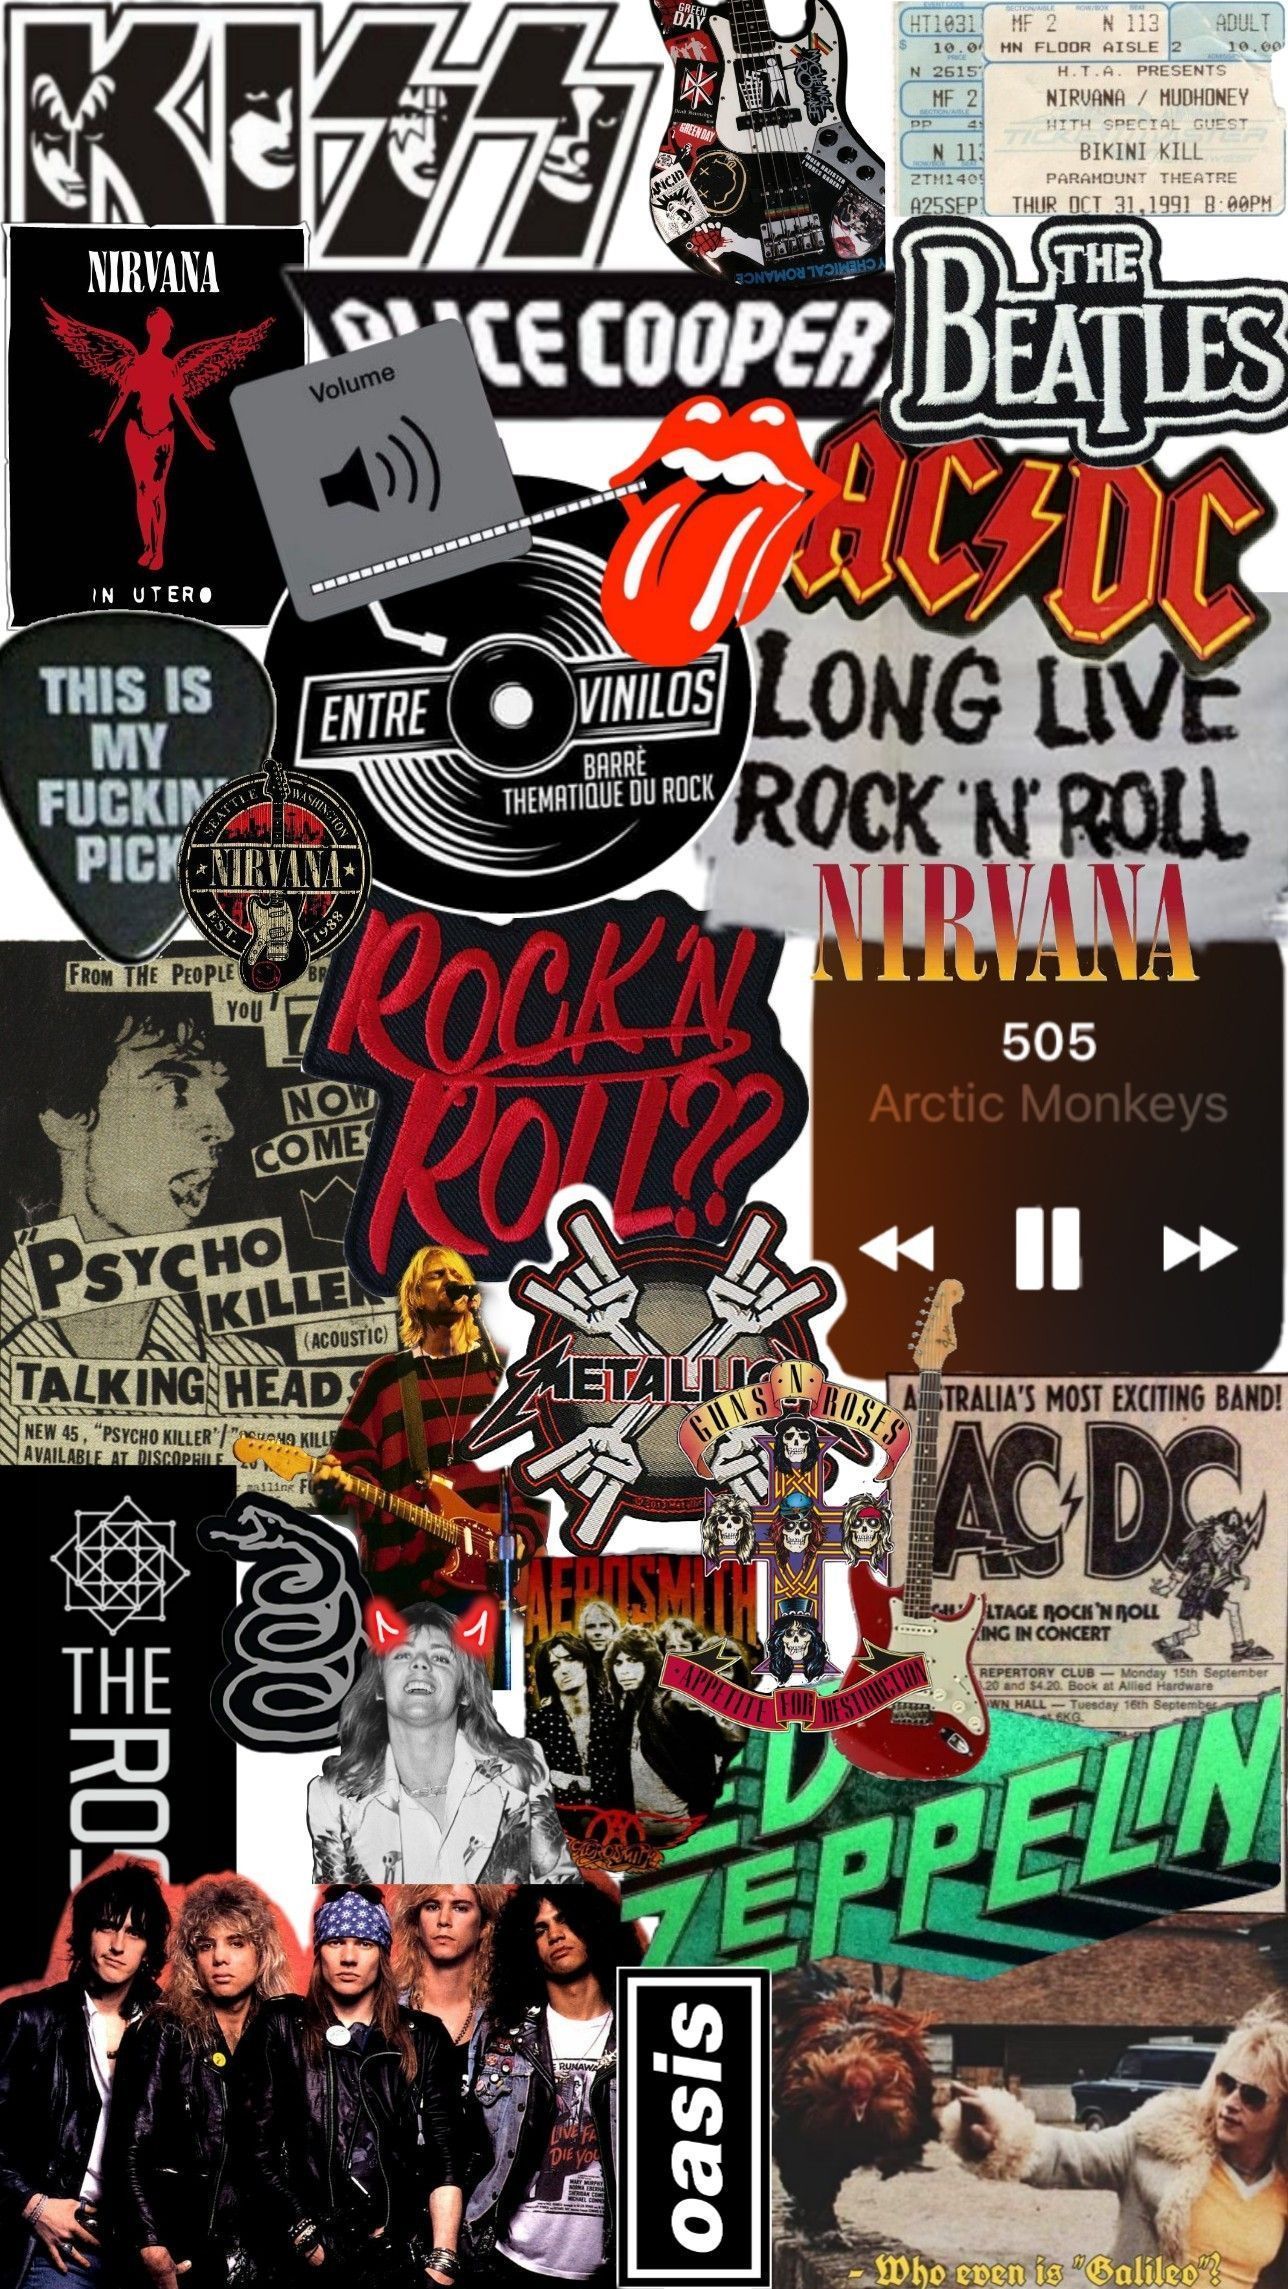 A collage of band logos including Nirvana, Beatles, Arctic Monkeys, and The Rolling Stones. - Punk, rock, Nirvana